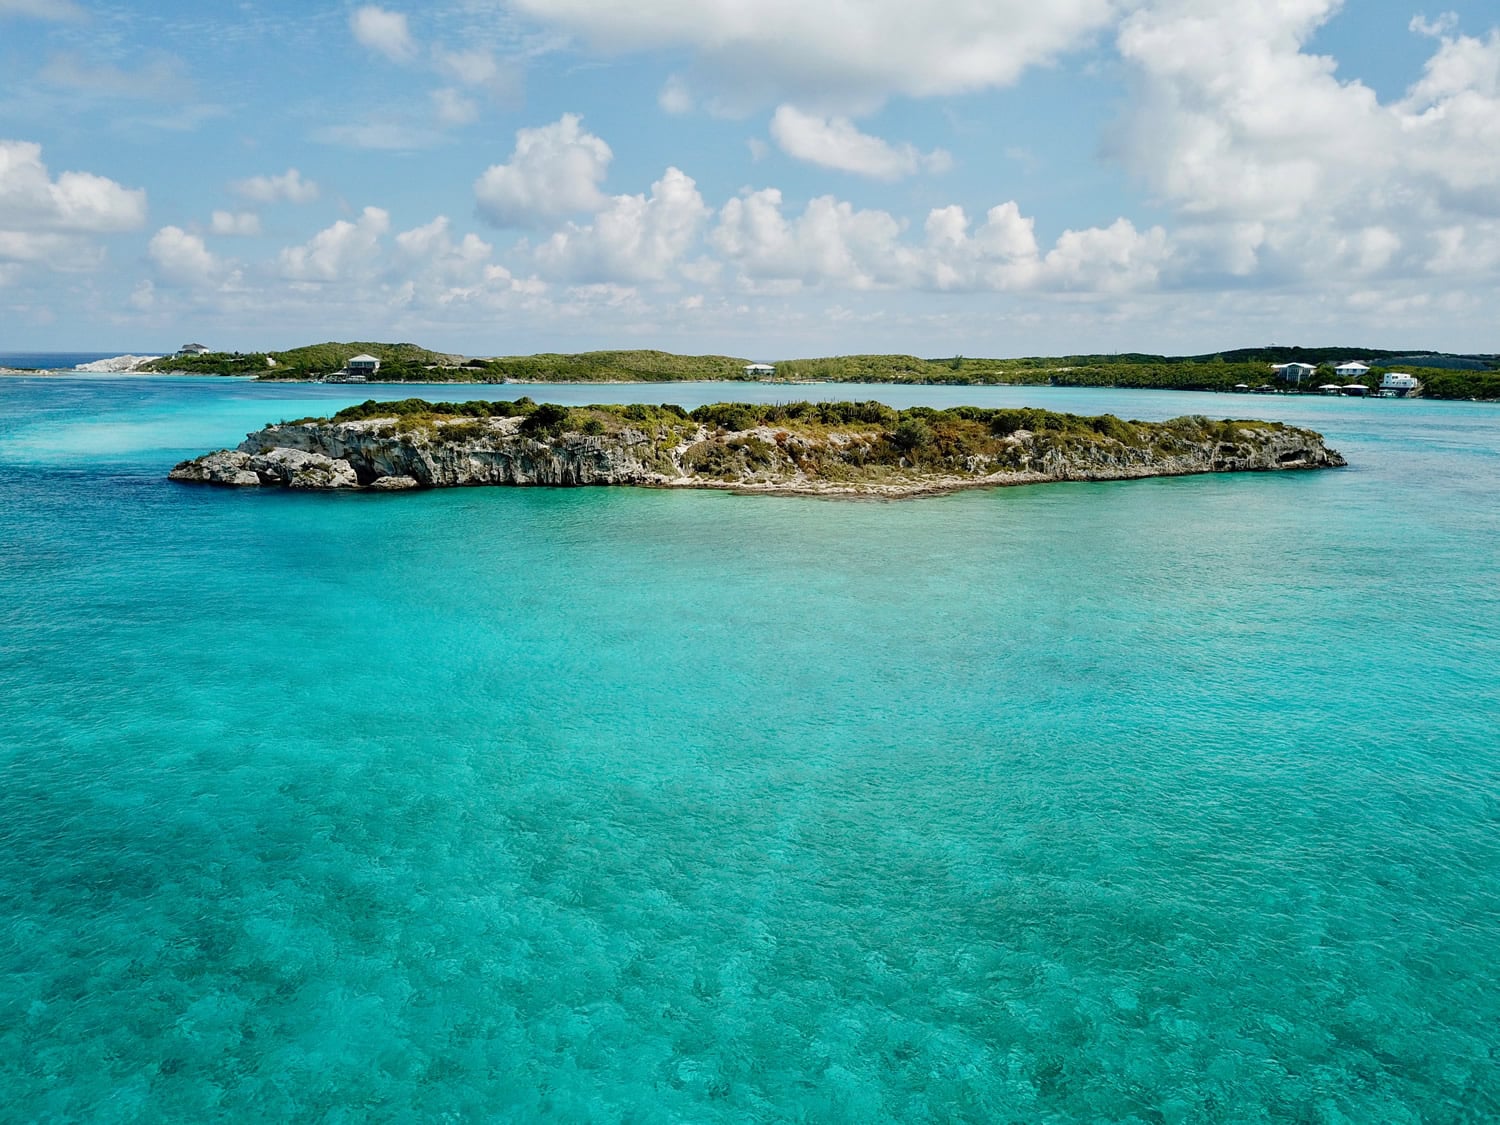 An aerial view of Staniel Cay, one of the stunning islands in The Bahamas, surrounded by turquoise water.